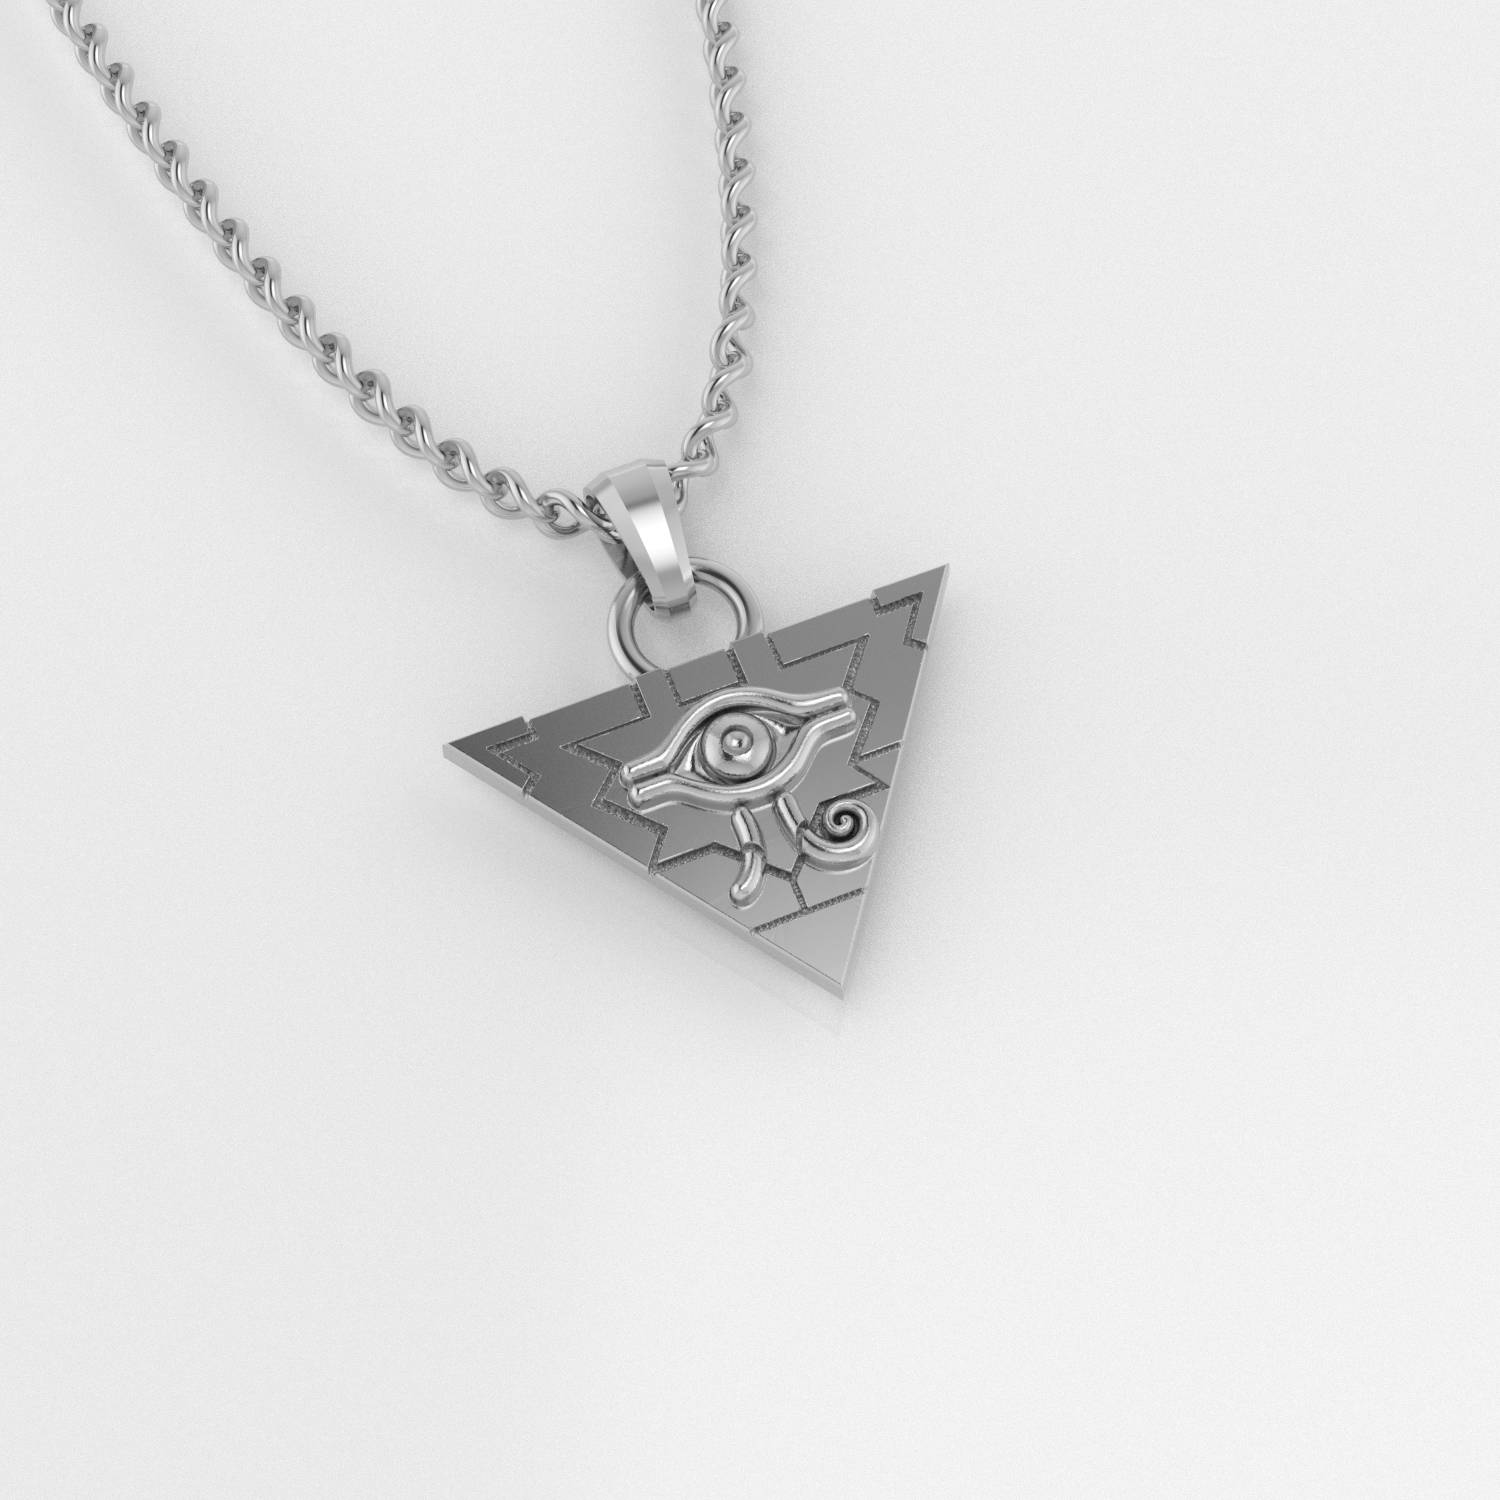 Yugioh Yu-Gi-Oh! The Millenium Puzzle Illuminati Pyramid Horus Ra Evil All  seeing Eye Men's Pendant Necklace Pewter Gold plated Pendant Good Luck  Money Wealth Charm Protection Amulet Brass ball chain : Amazon.sg: